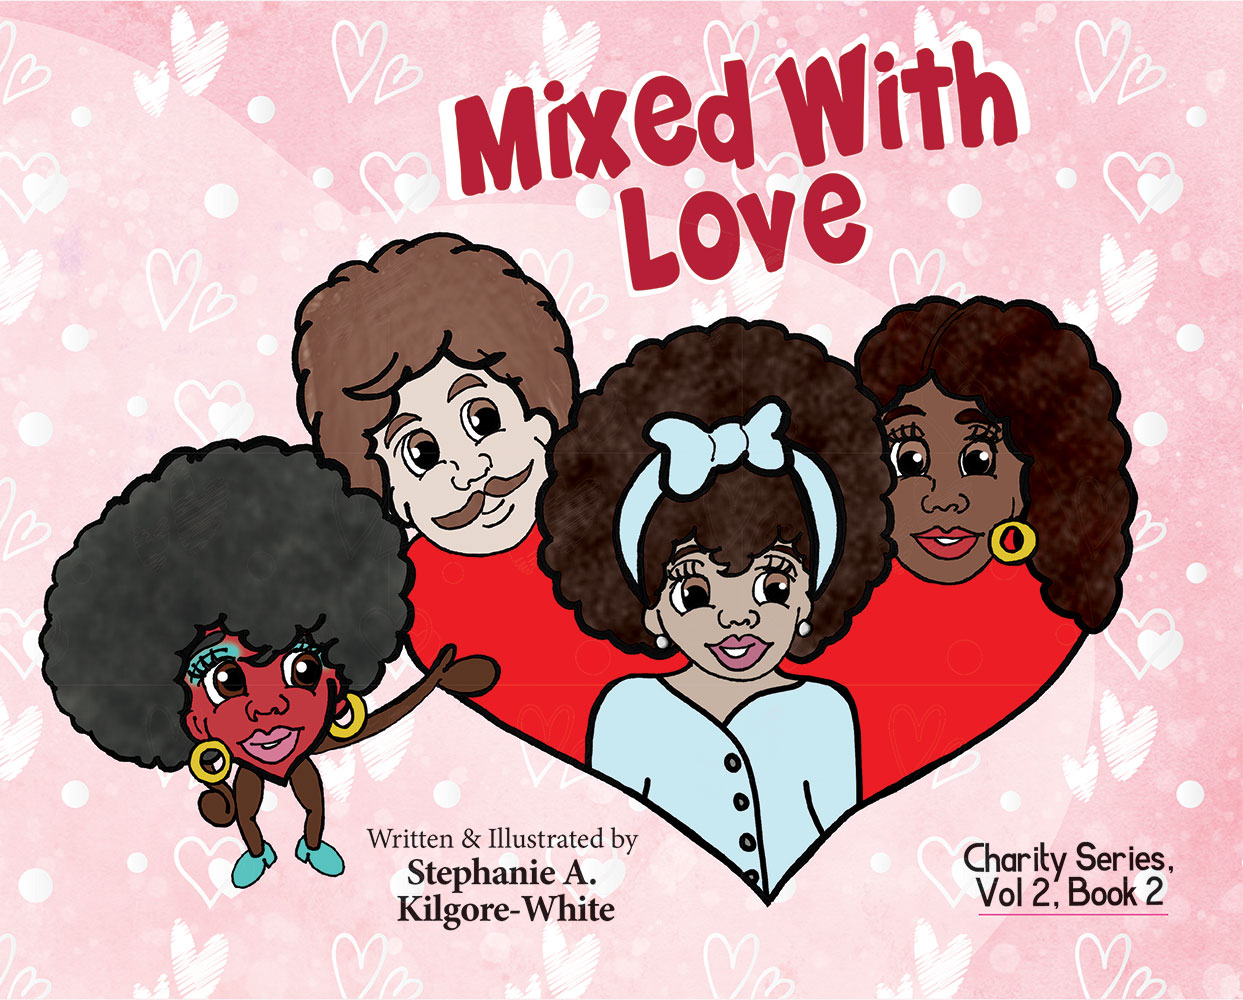 Mixed With Love by Stephanie A. Kilgore-White